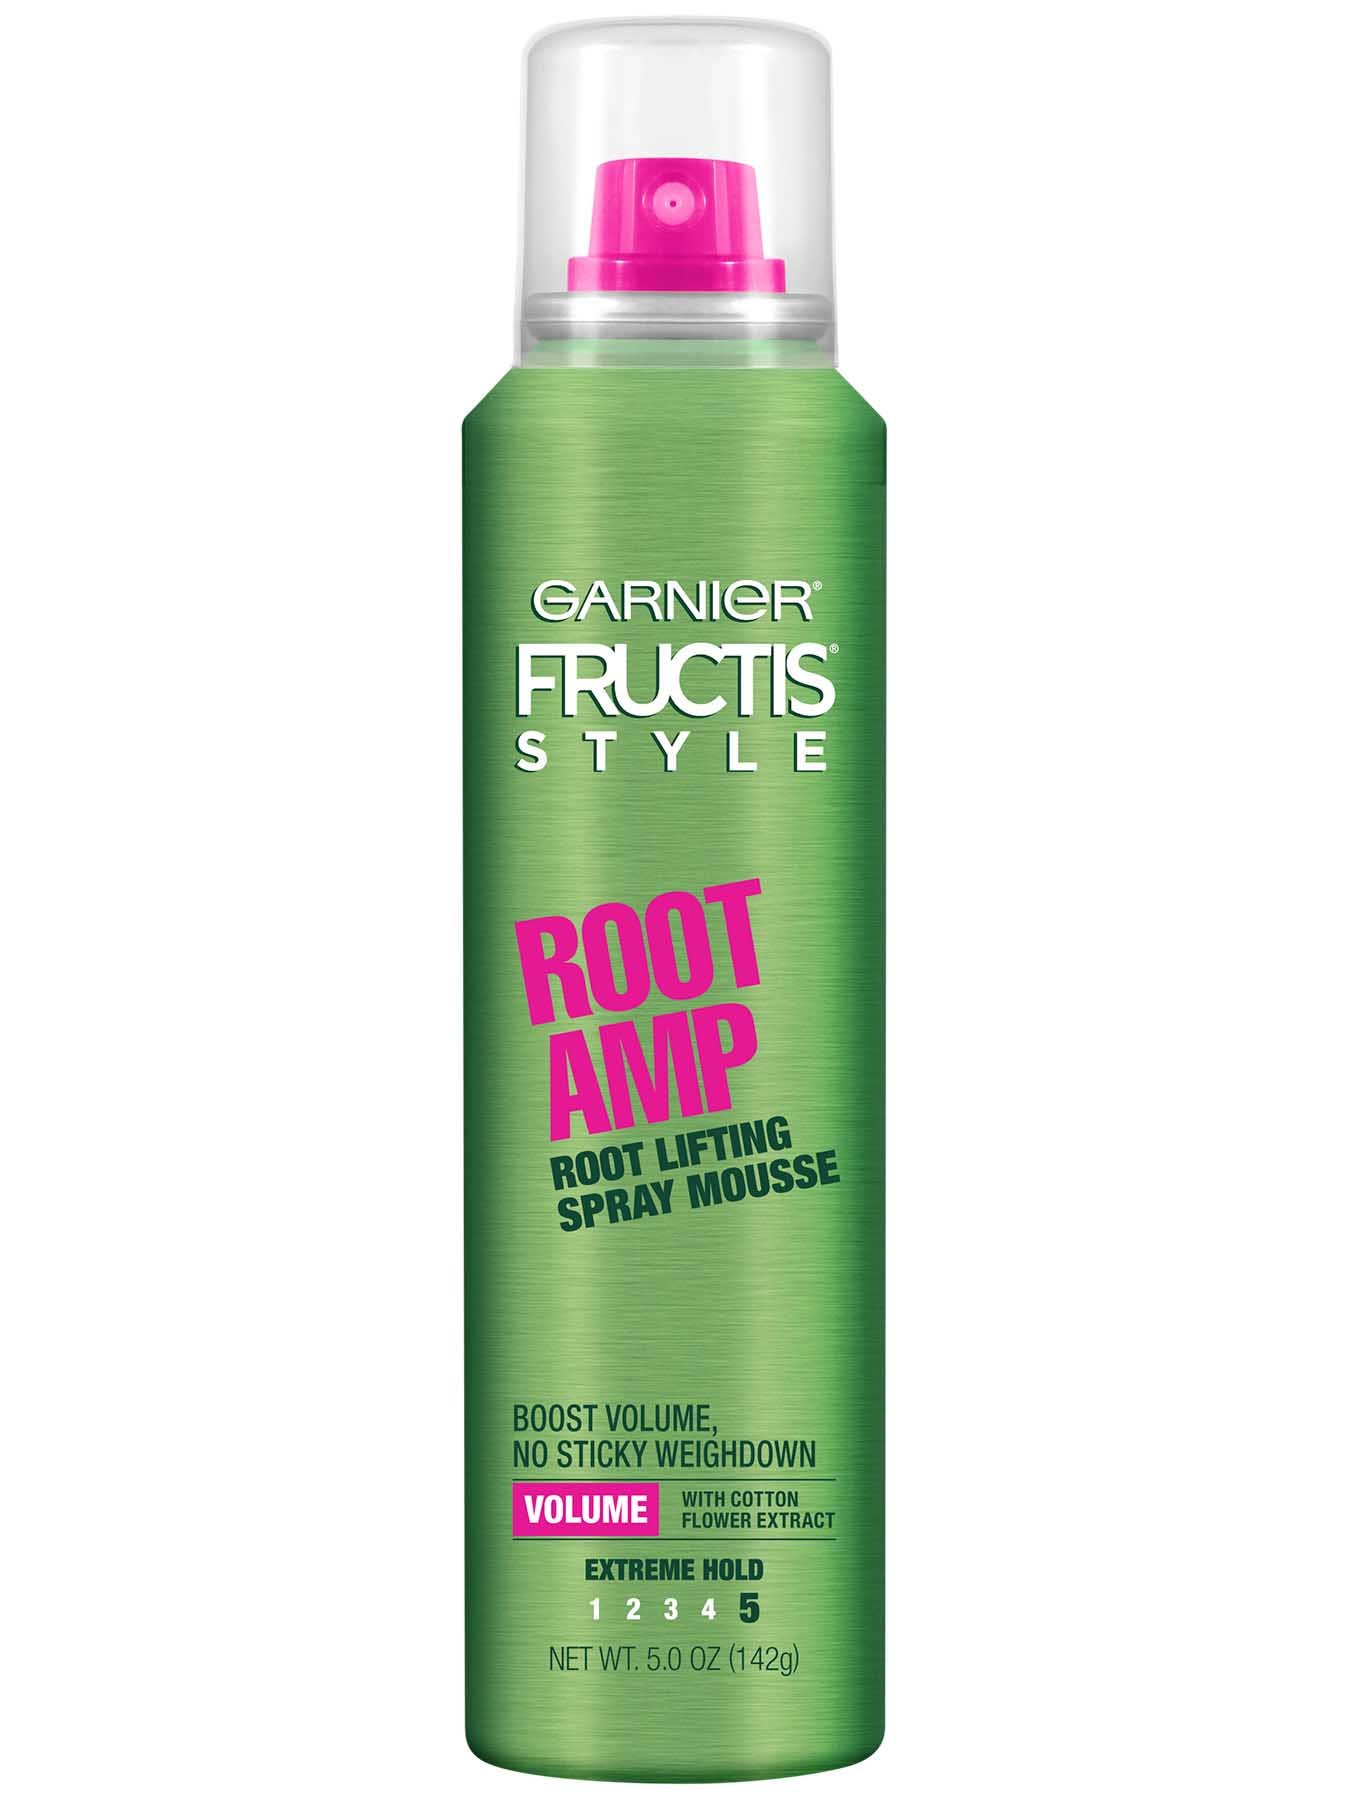 Front view of Root Amp Root Lifting Spray Mousse.